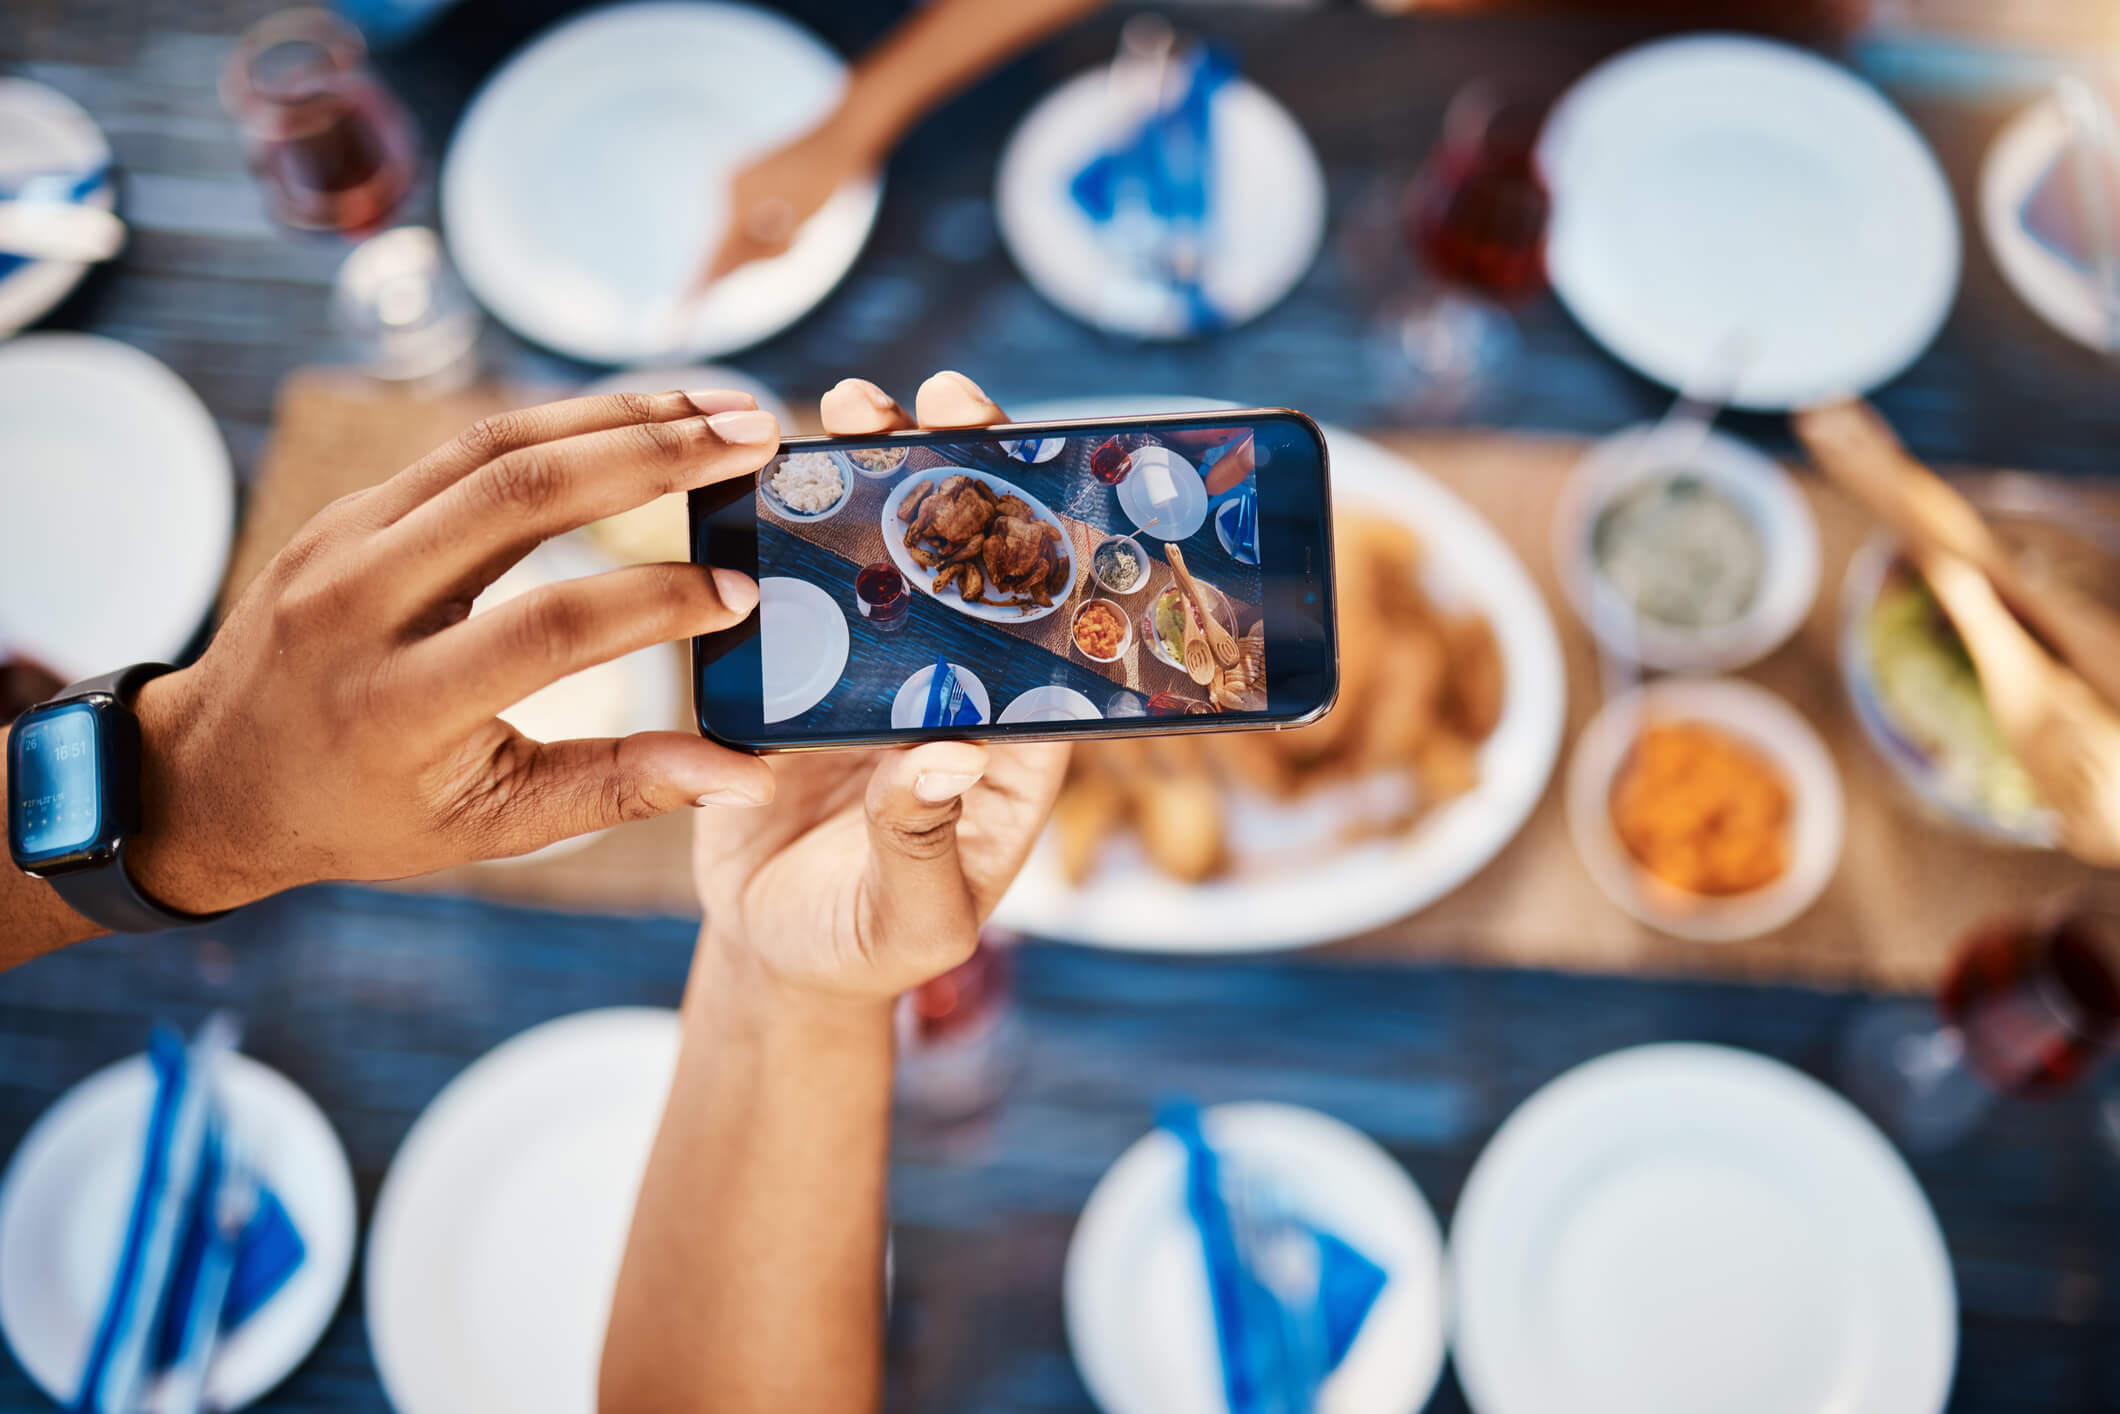 Culinary influencer taking pictures of a large meal set out on a table